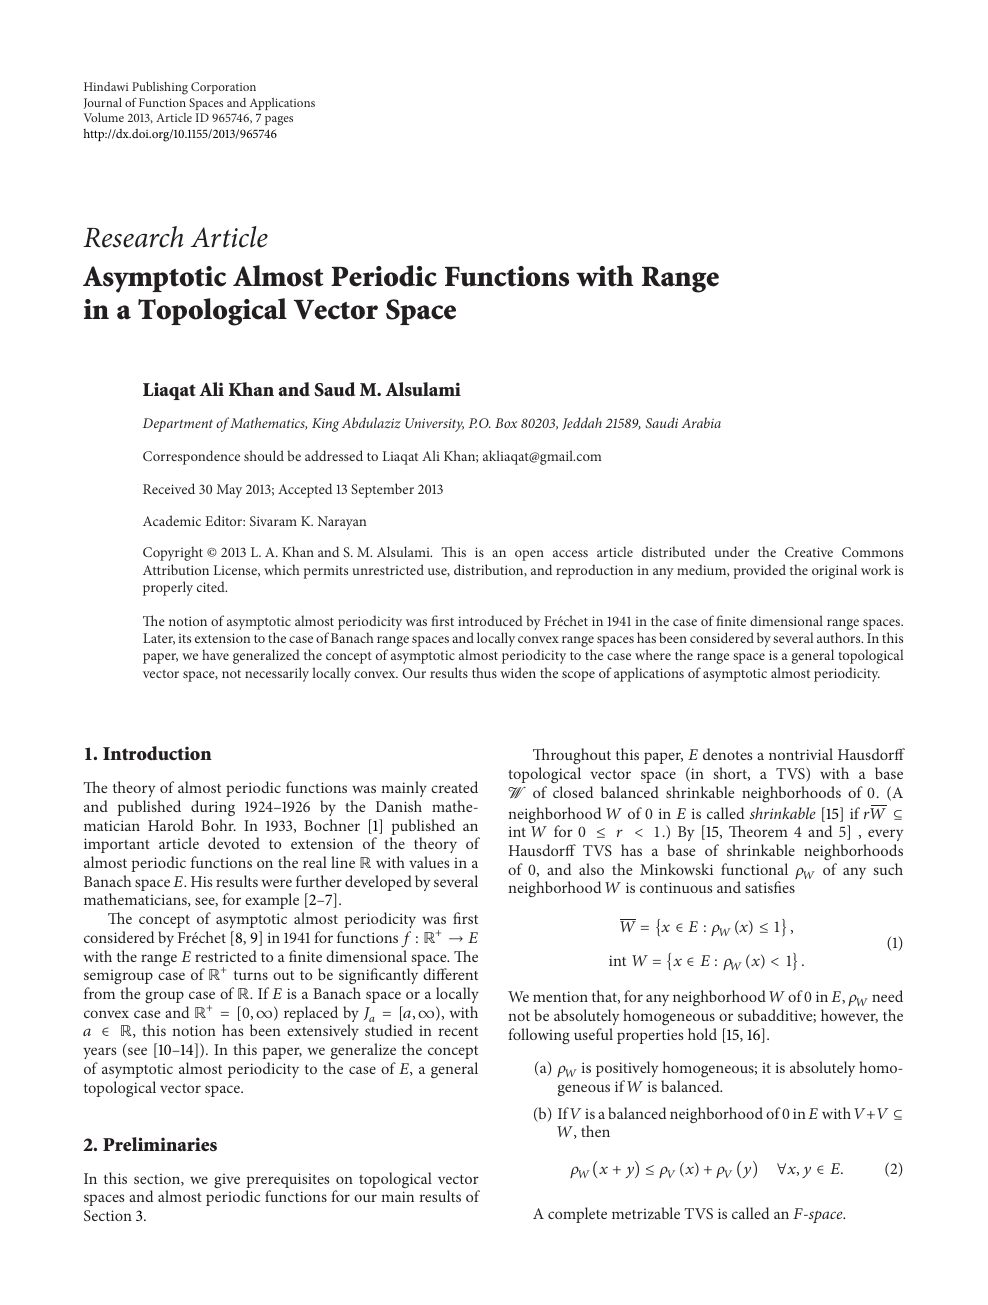 Asymptotic Almost Periodic Functions With Range In A Topological Vector Space Topic Of Research Paper In Mathematics Download Scholarly Article Pdf And Read For Free On Cyberleninka Open Science Hub